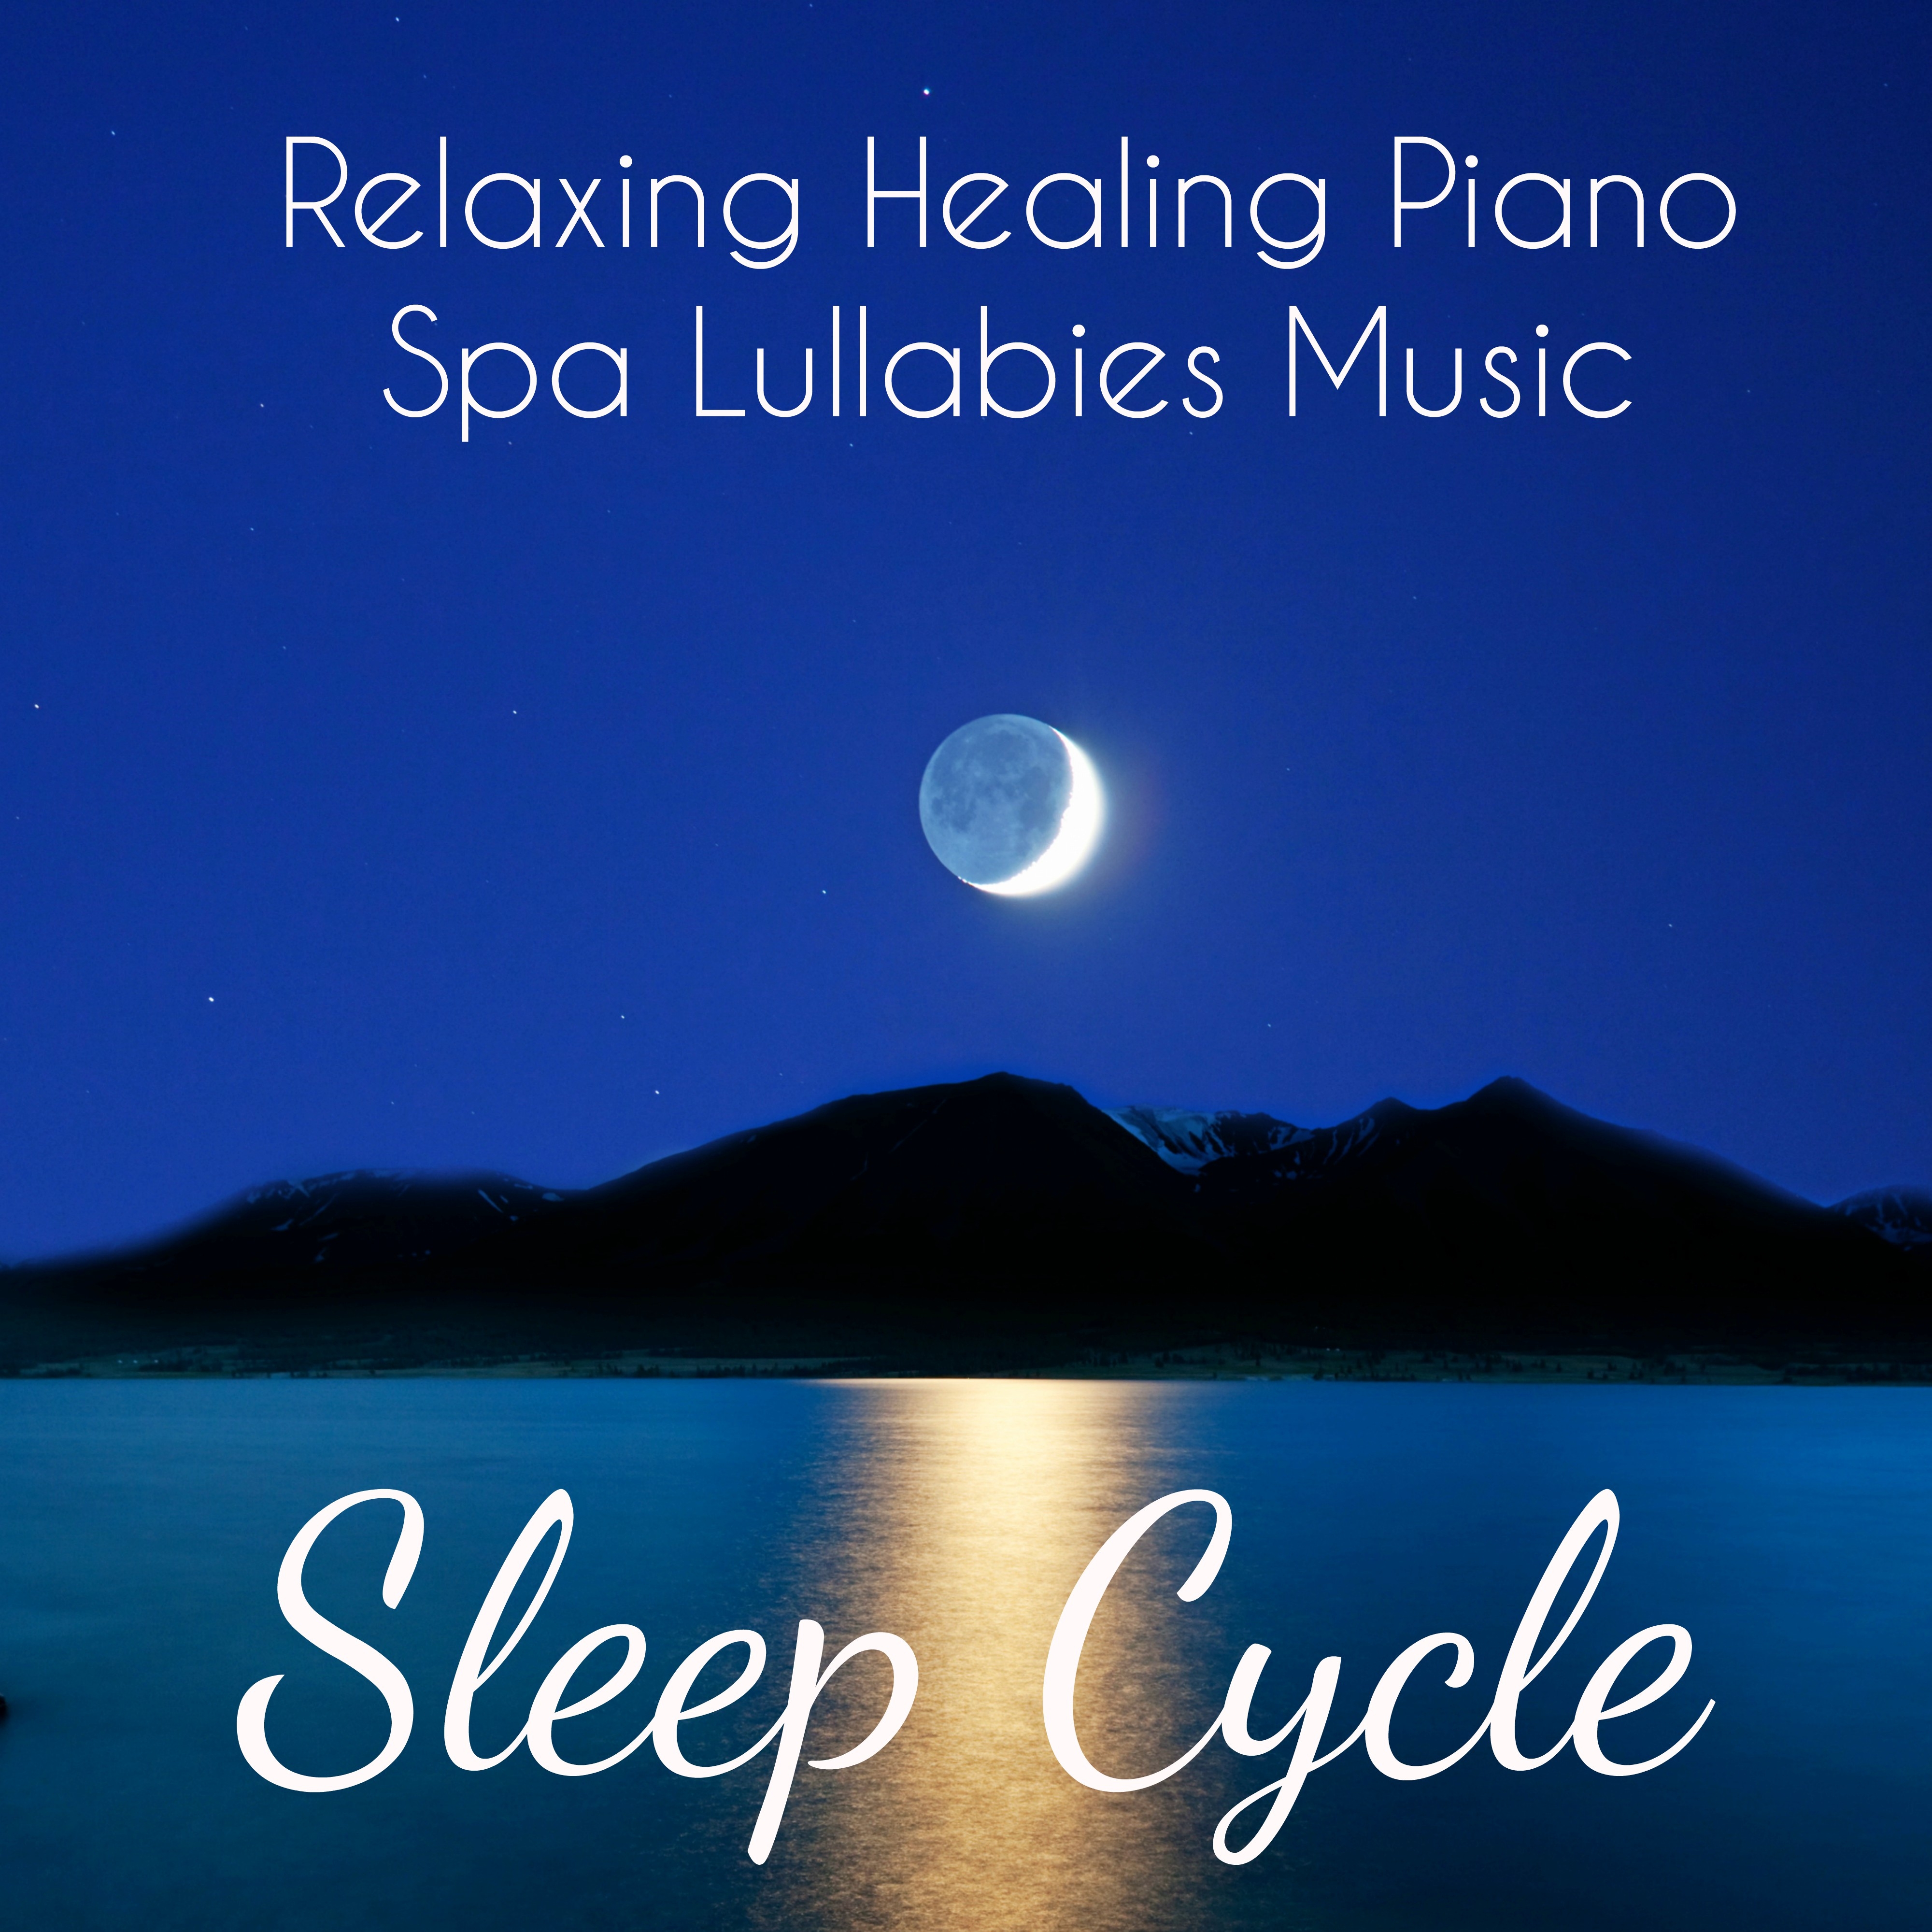 Sleep Cycle - Relaxing Healing Piano Spa Lullabies Music for Deep Meditation Problem Solving Ambient Therapy